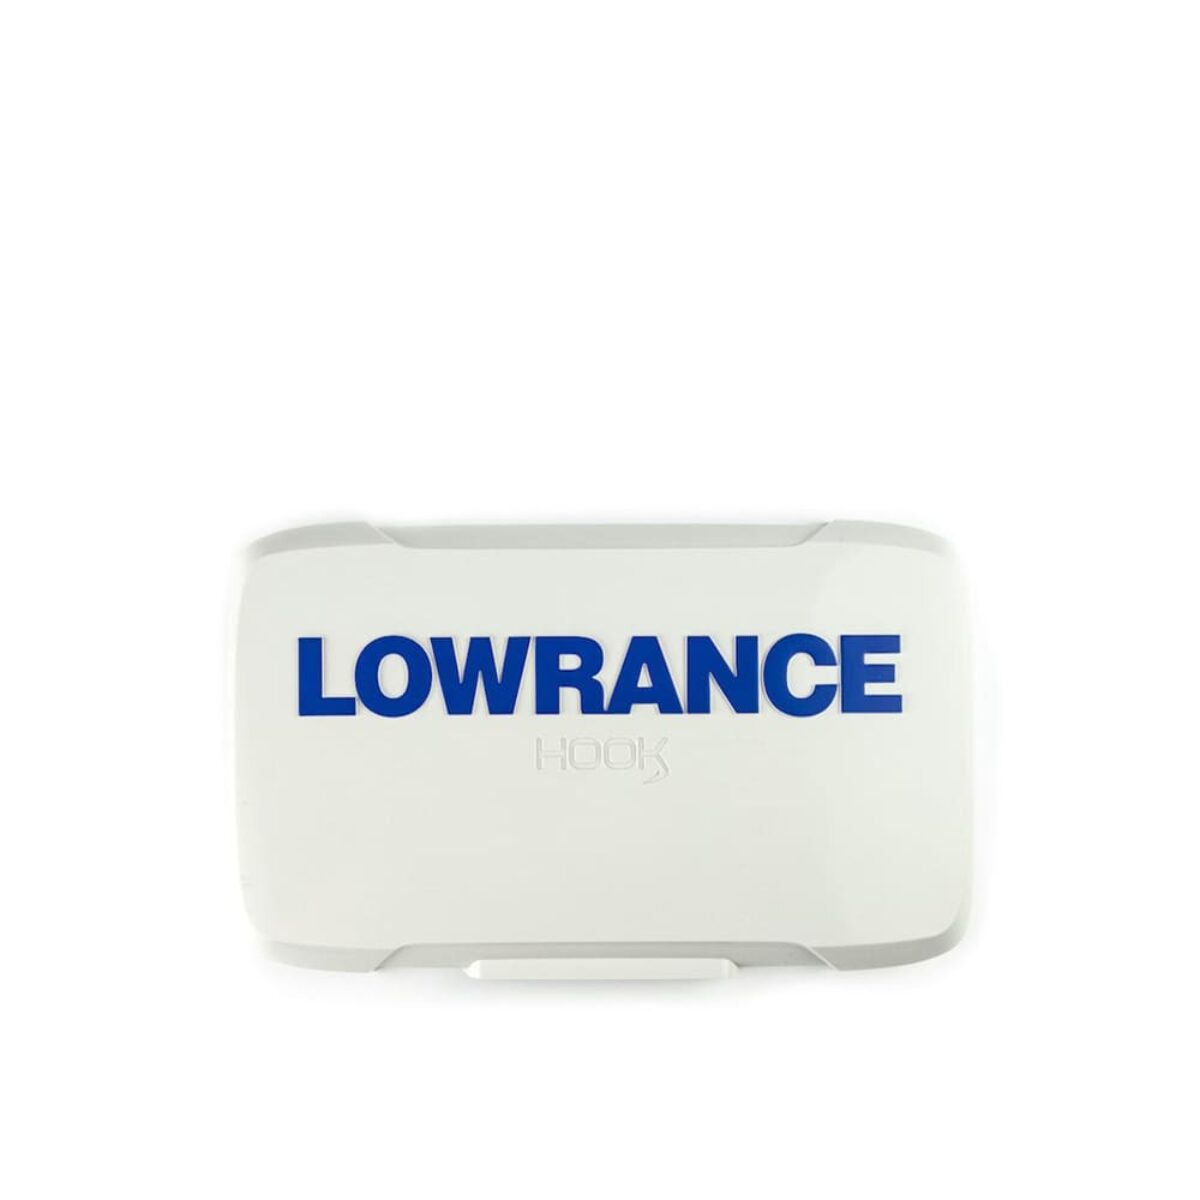 Lowrance HOOK2-5 Suncover (000-14174-001) at GPS Central